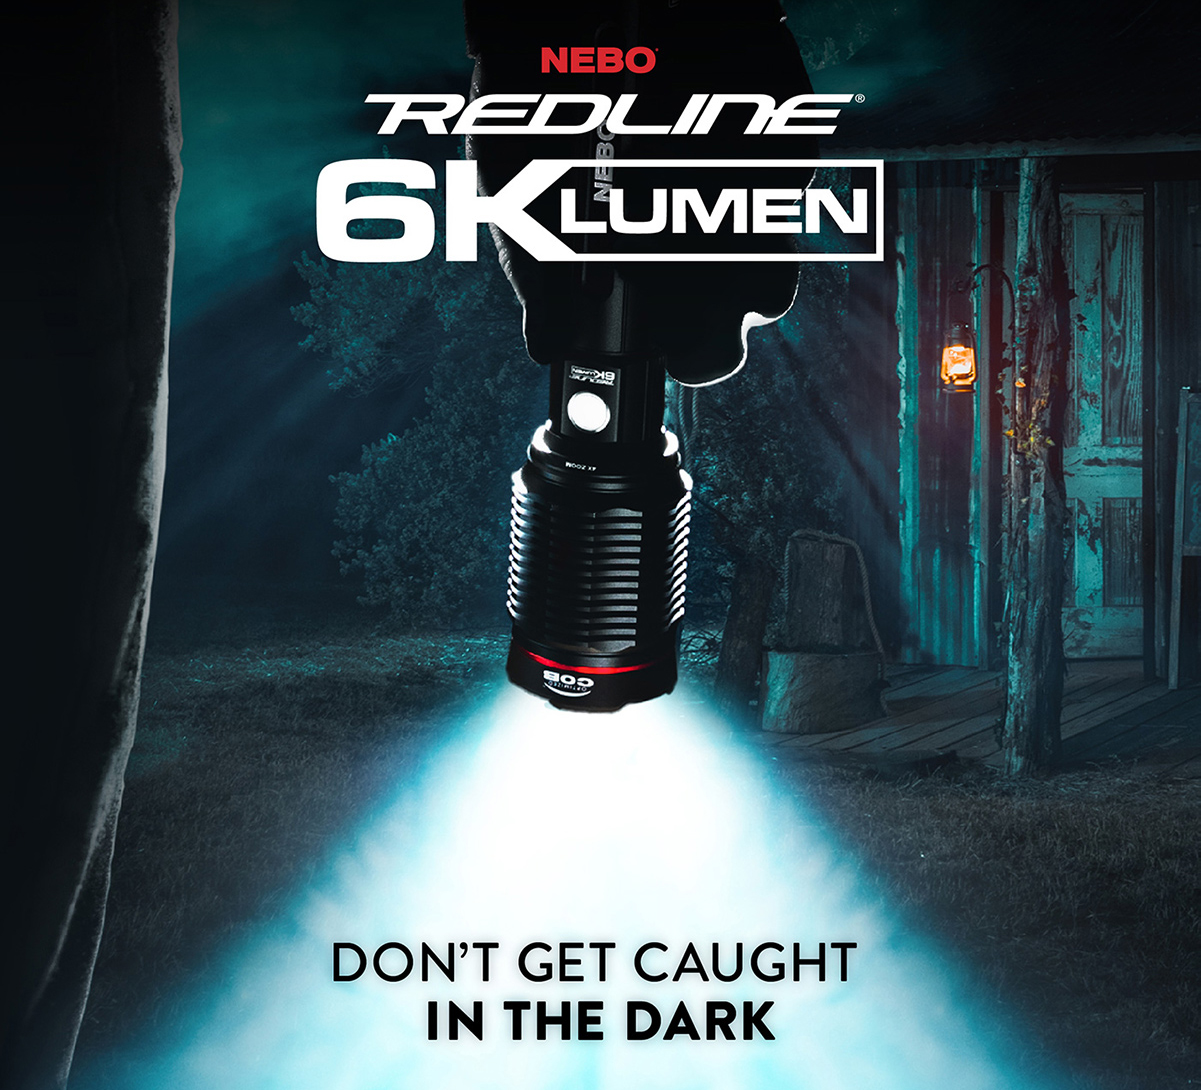 At 6,000 lumens, the REDLINE 6K is our brightest flashlight ever!